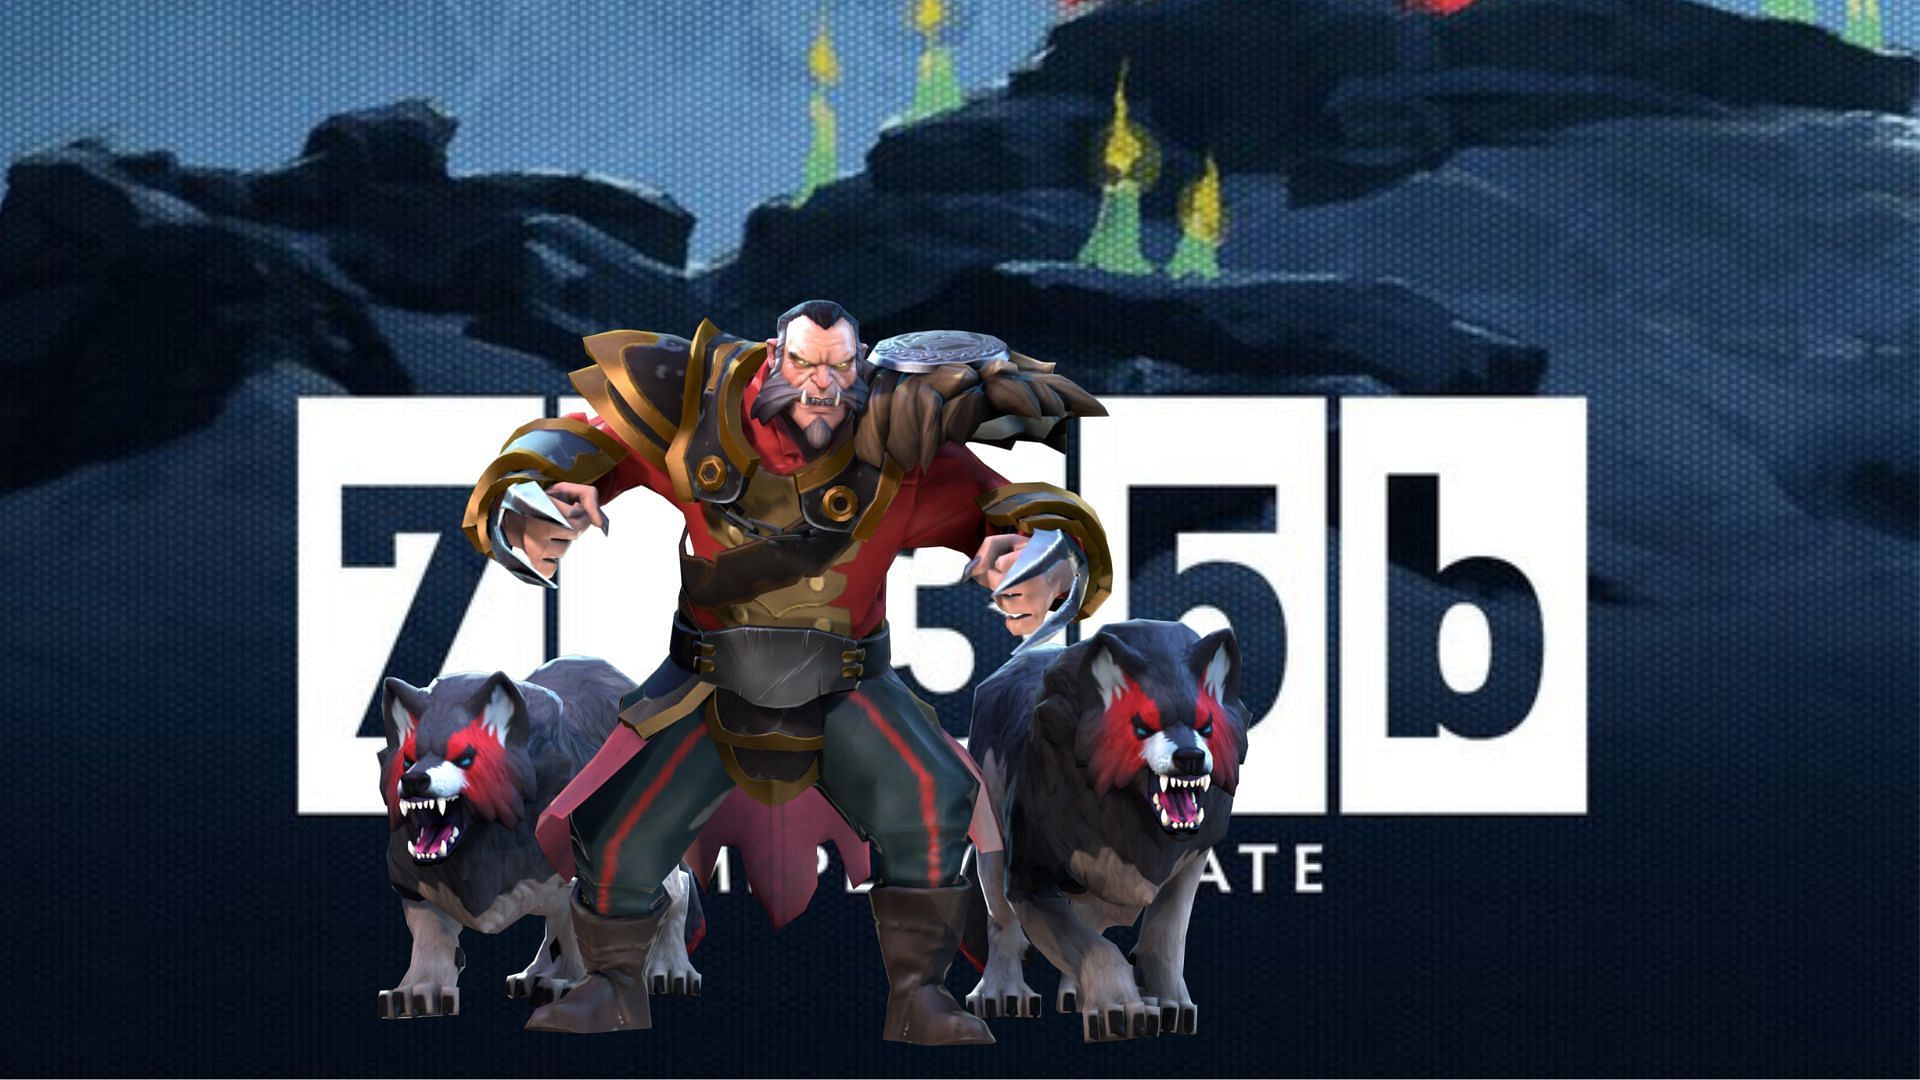 Featured image of Lycan (Image via Valve and Sportskeeda)